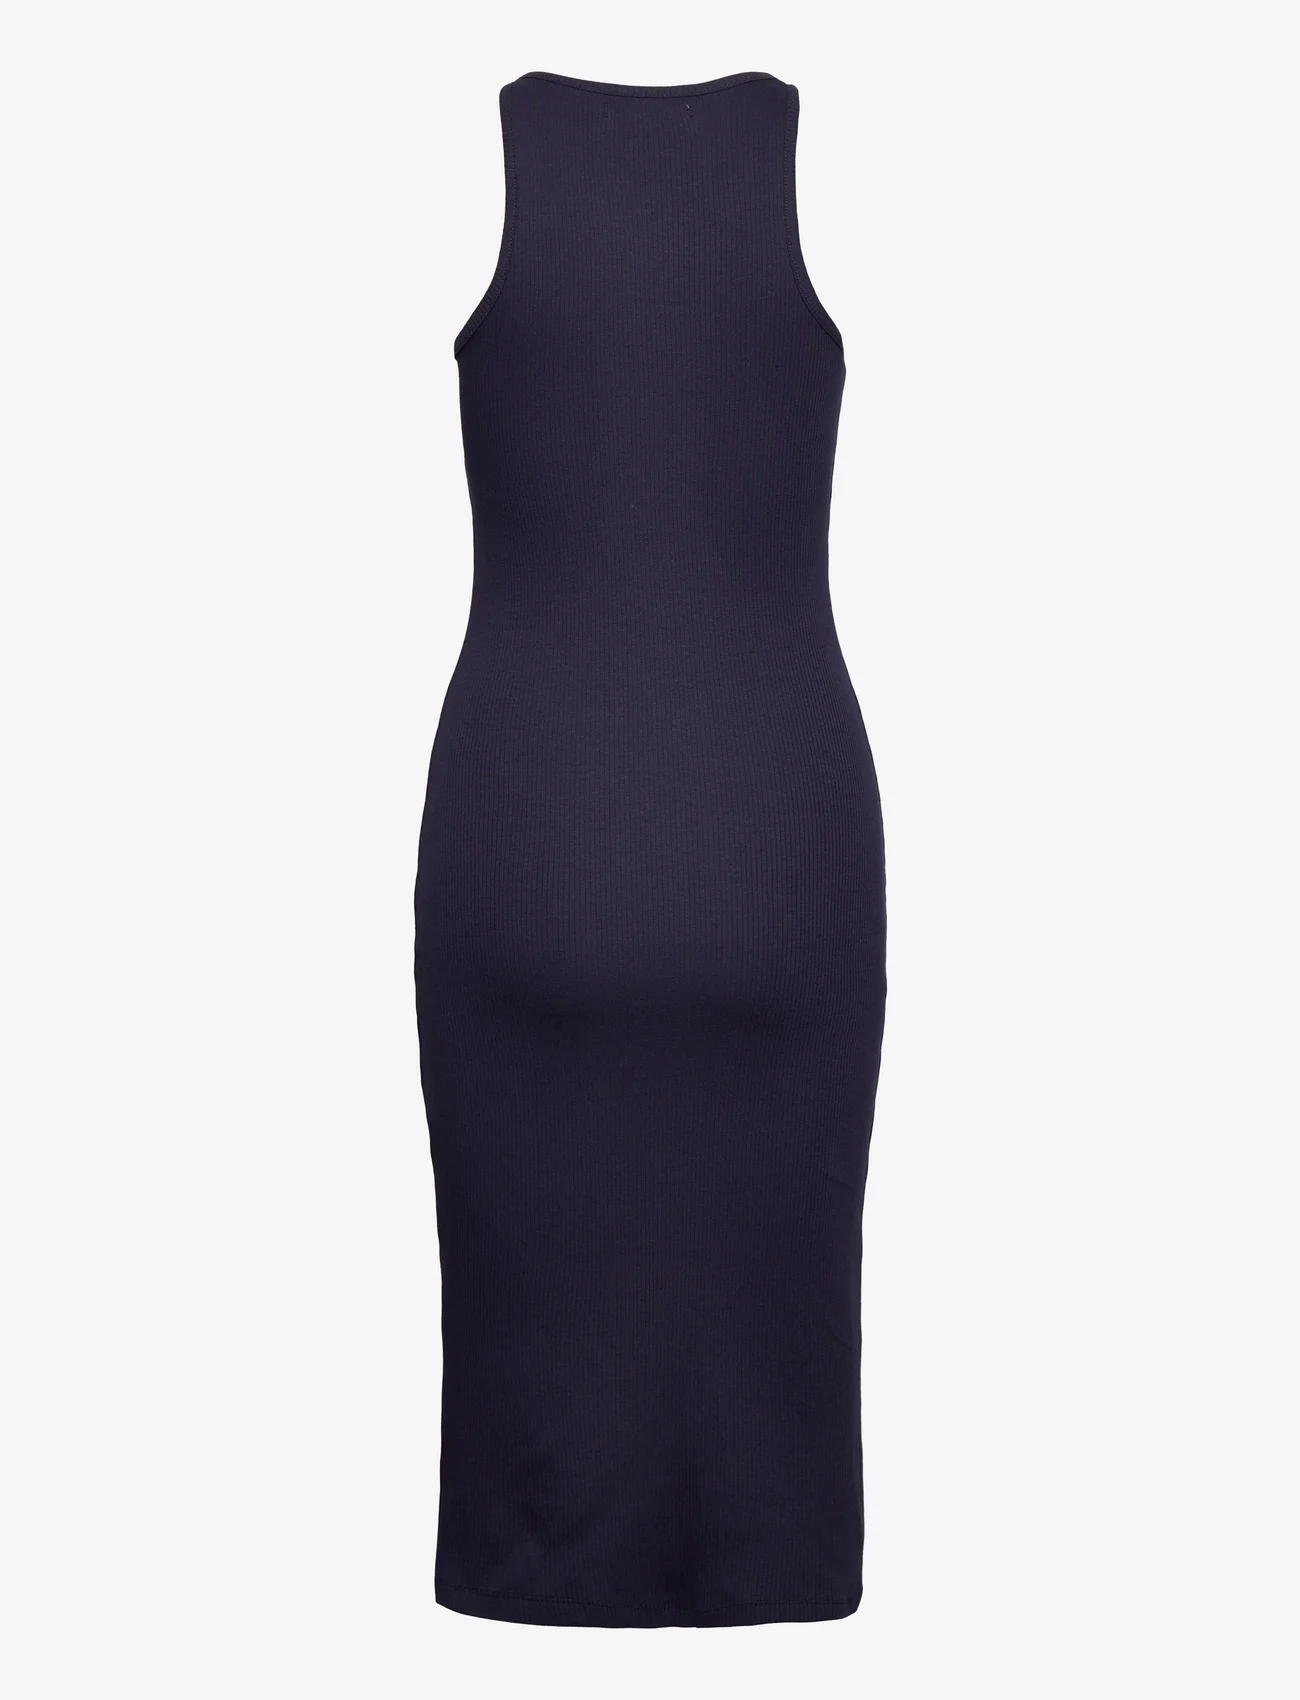 French Connection - RACER M - t-shirt dresses - dark navy - 1